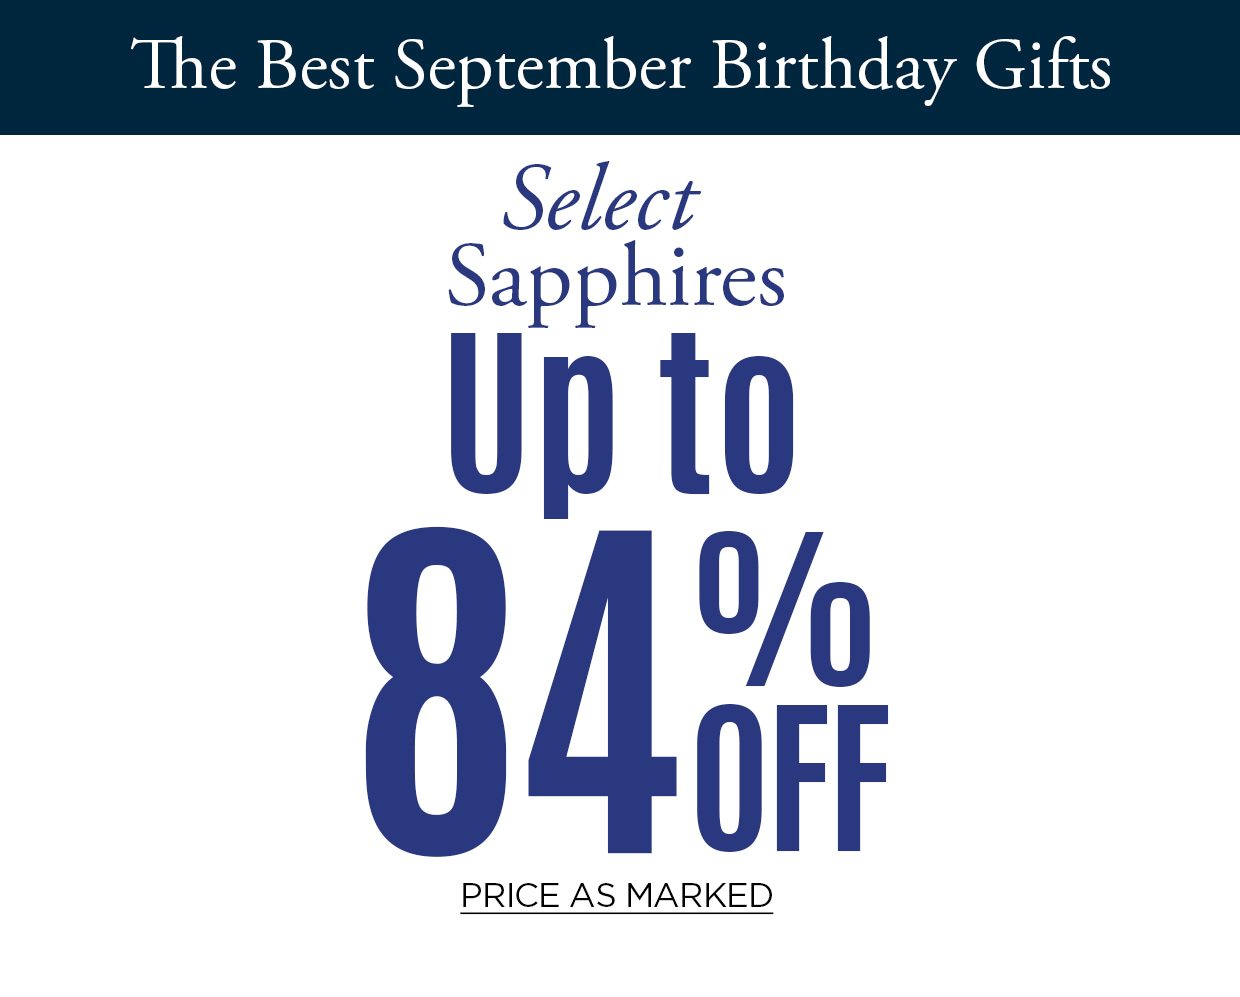 The Best September Birthday Gifts. Select Sapphires. Up to 84% Off. Price as Marked.